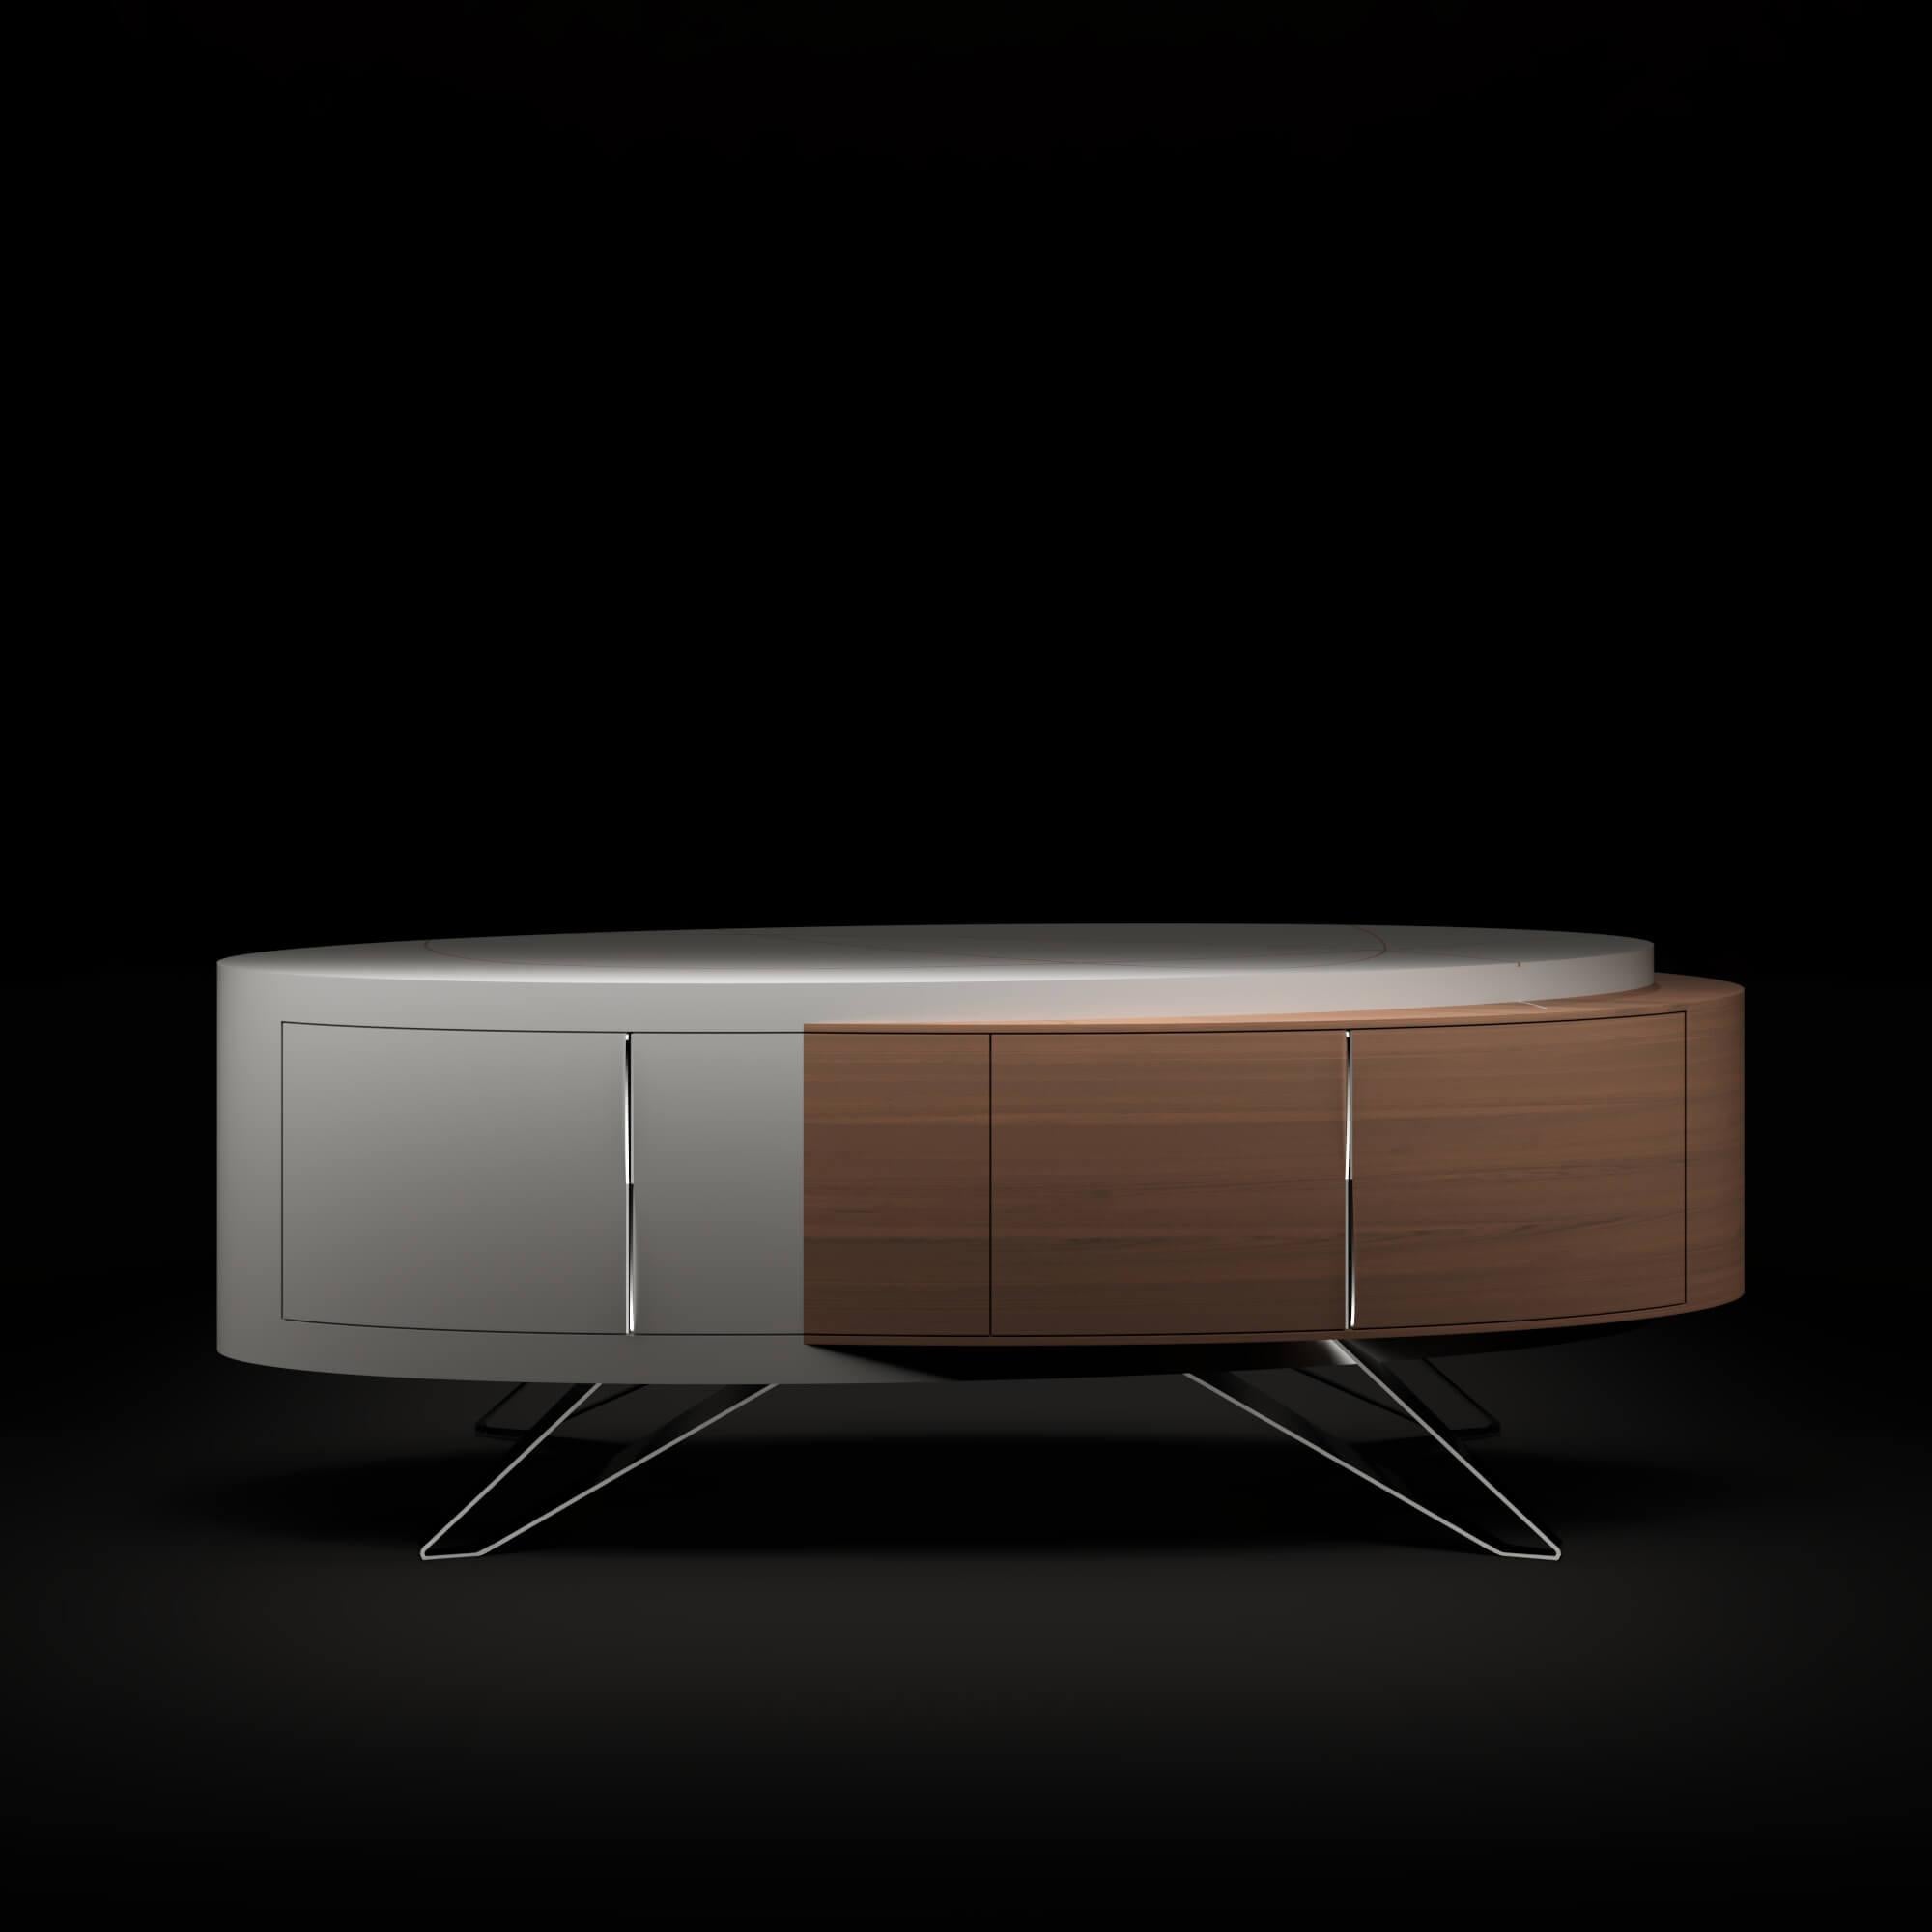 Portuguese Modern Curved Credenza Sideboard Oak Wood White Lacquer Polished Stainless Steel For Sale